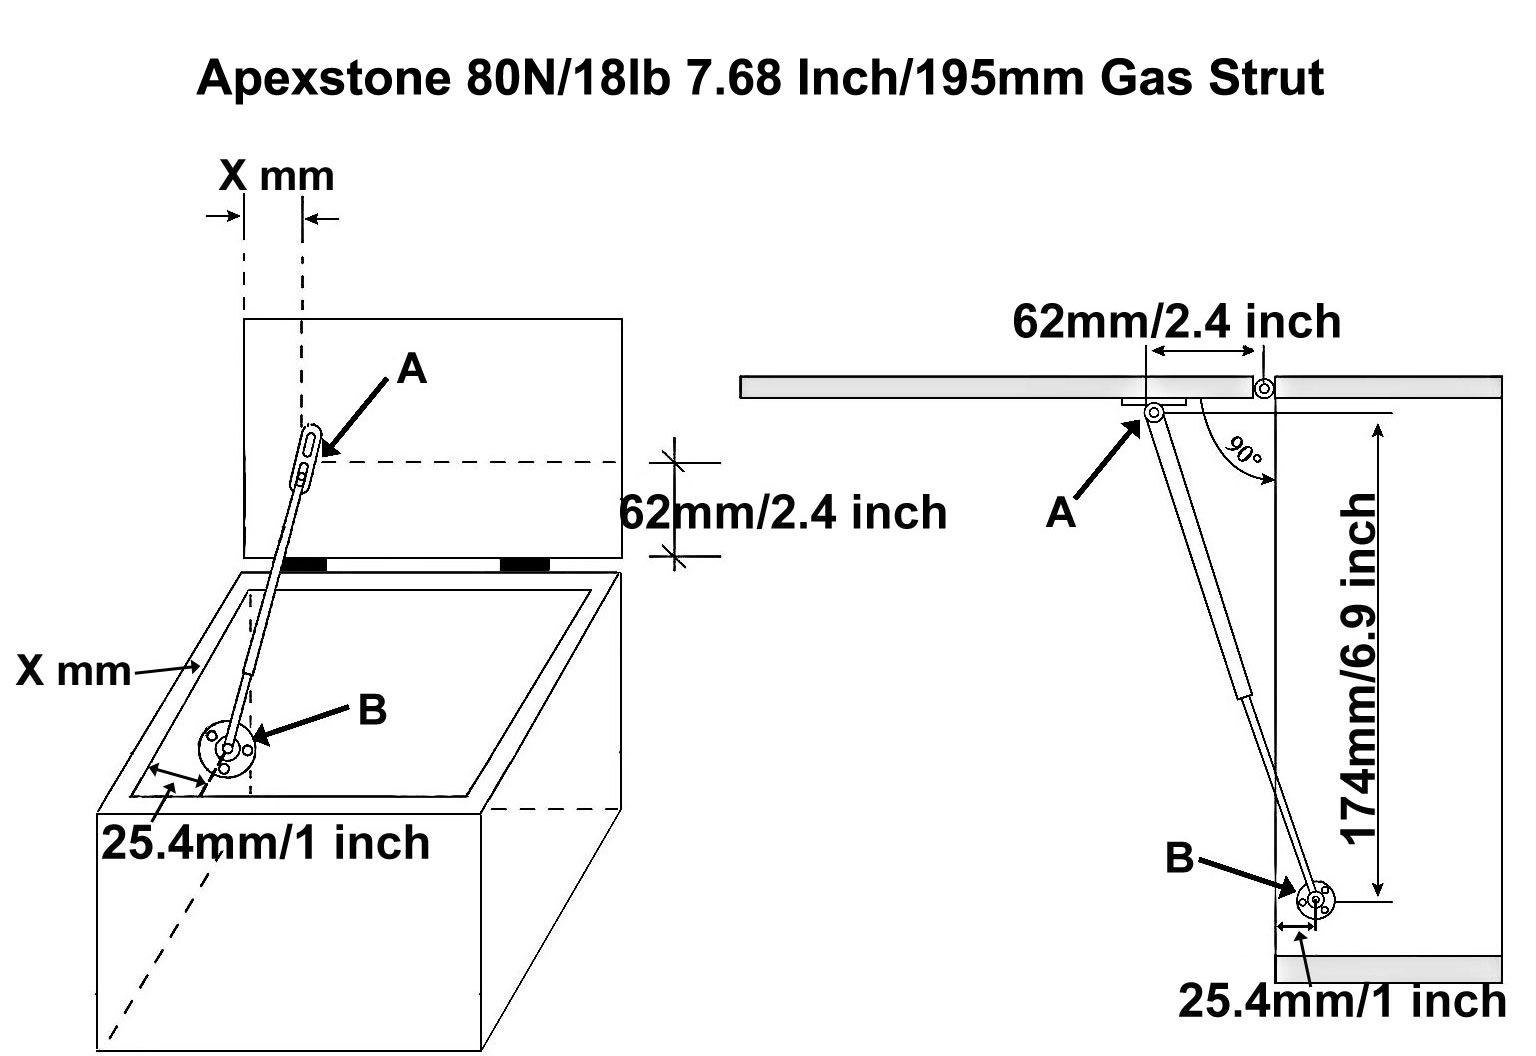 Apexstone 80N/18lb 7.68 Inch/195mm Gas Strut inatsllation guide, telling you how to install Cabinet Gas Struts in RV Camper